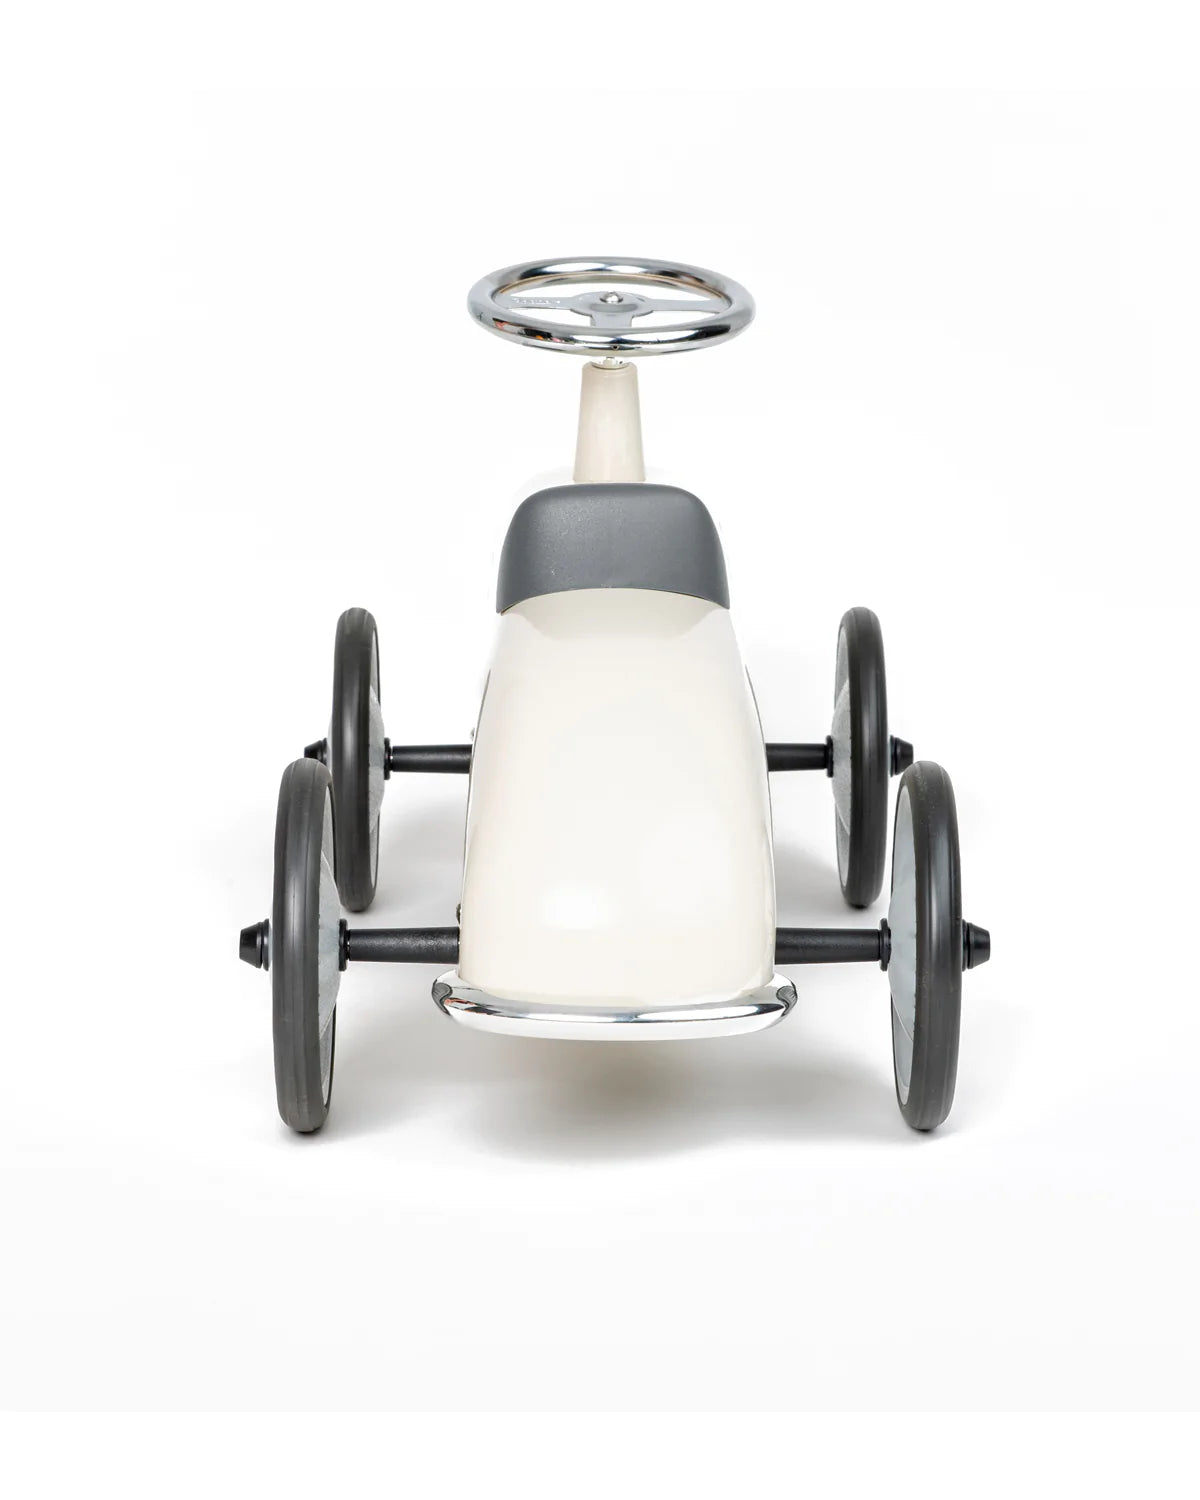 Baghera Ride-On Rider Roadster Ivory White